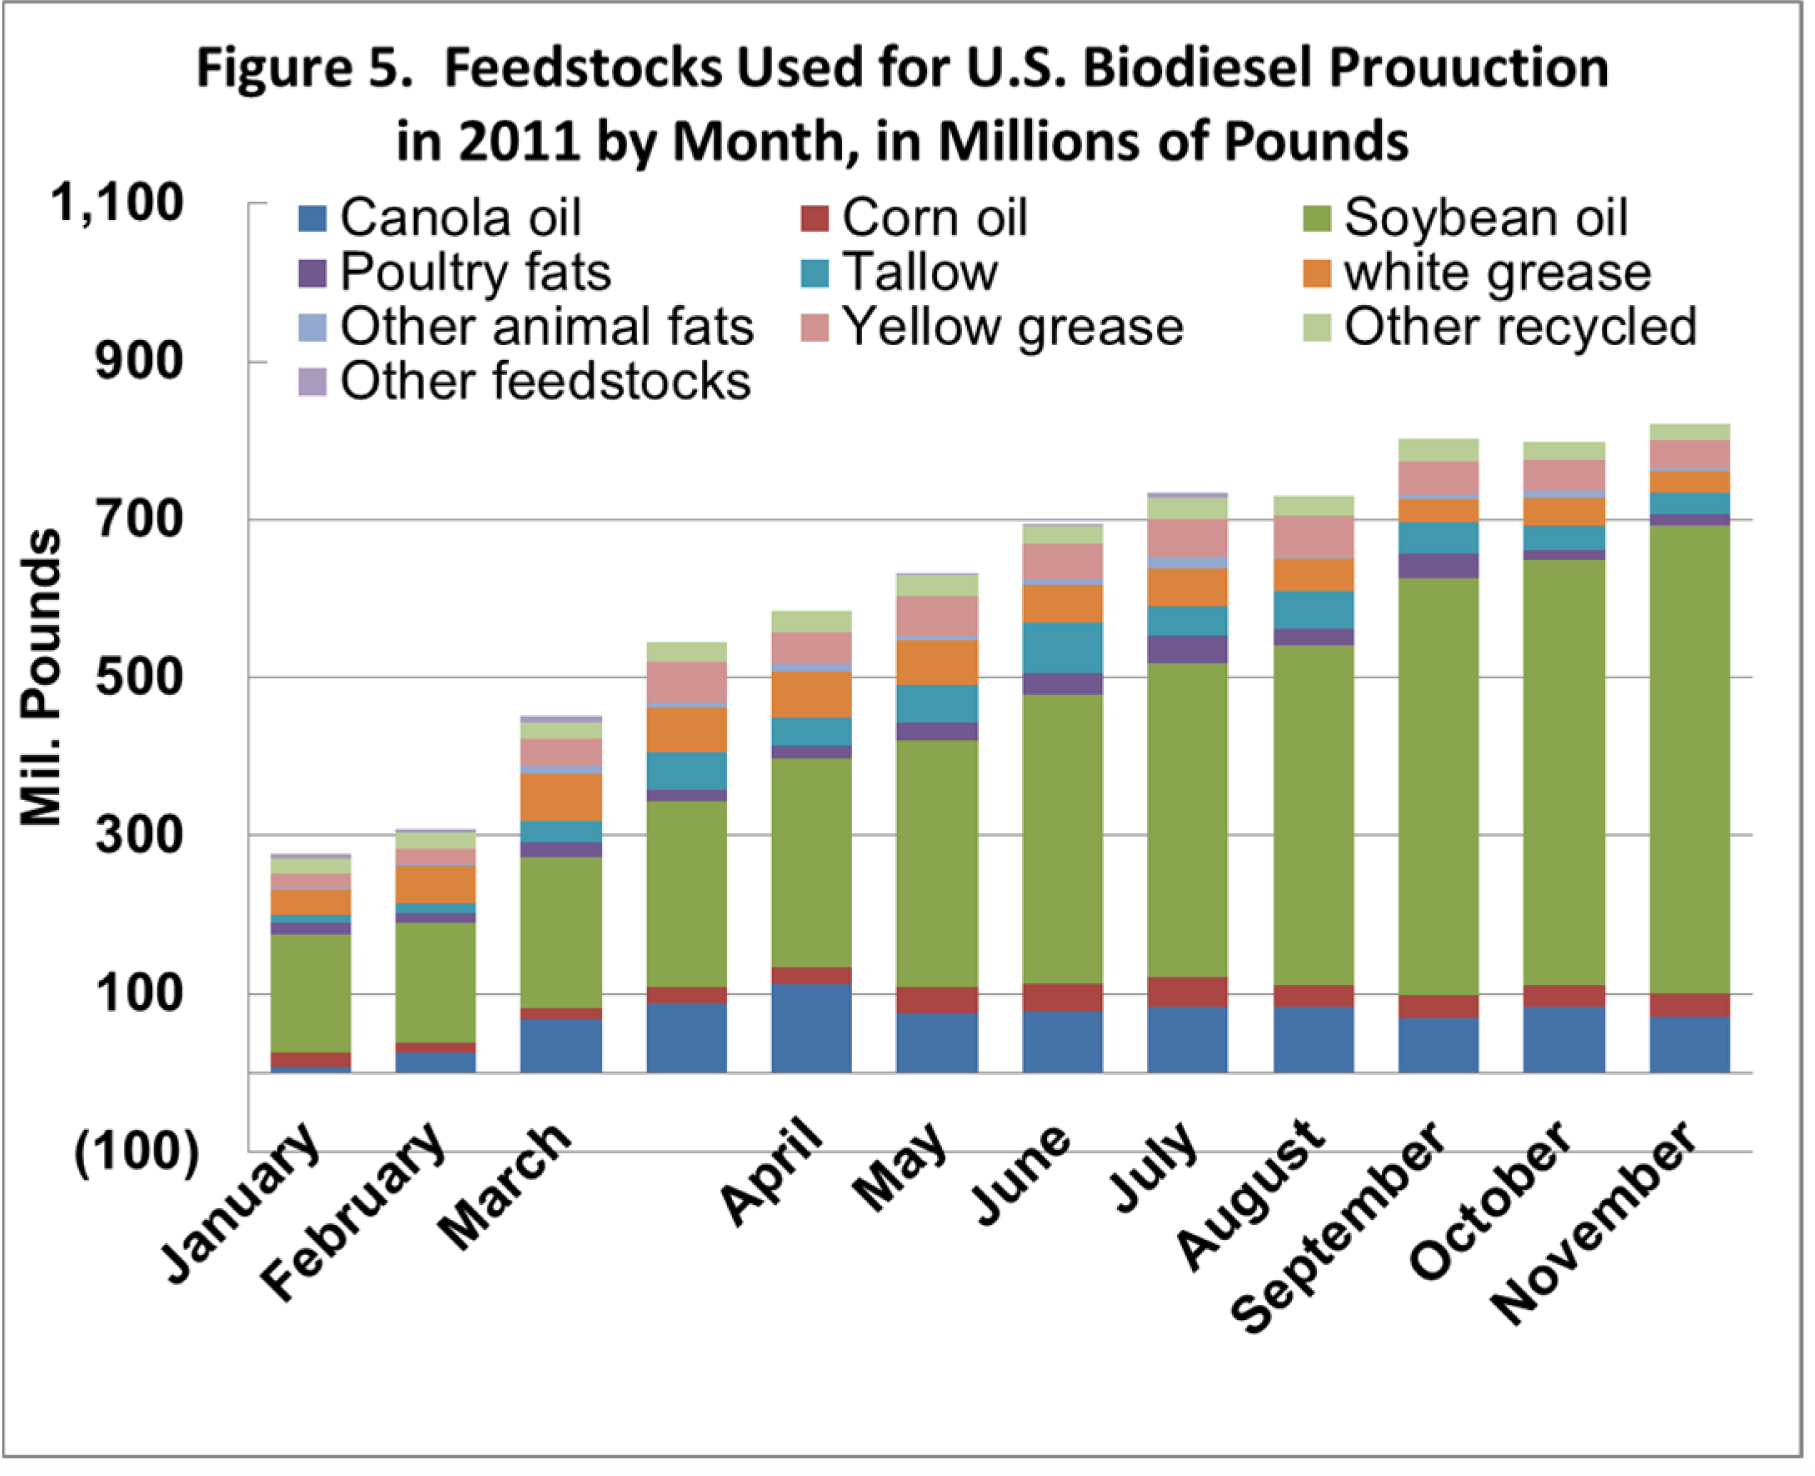 feedstocks used for U.S. Biodiesel production in 2011 by month